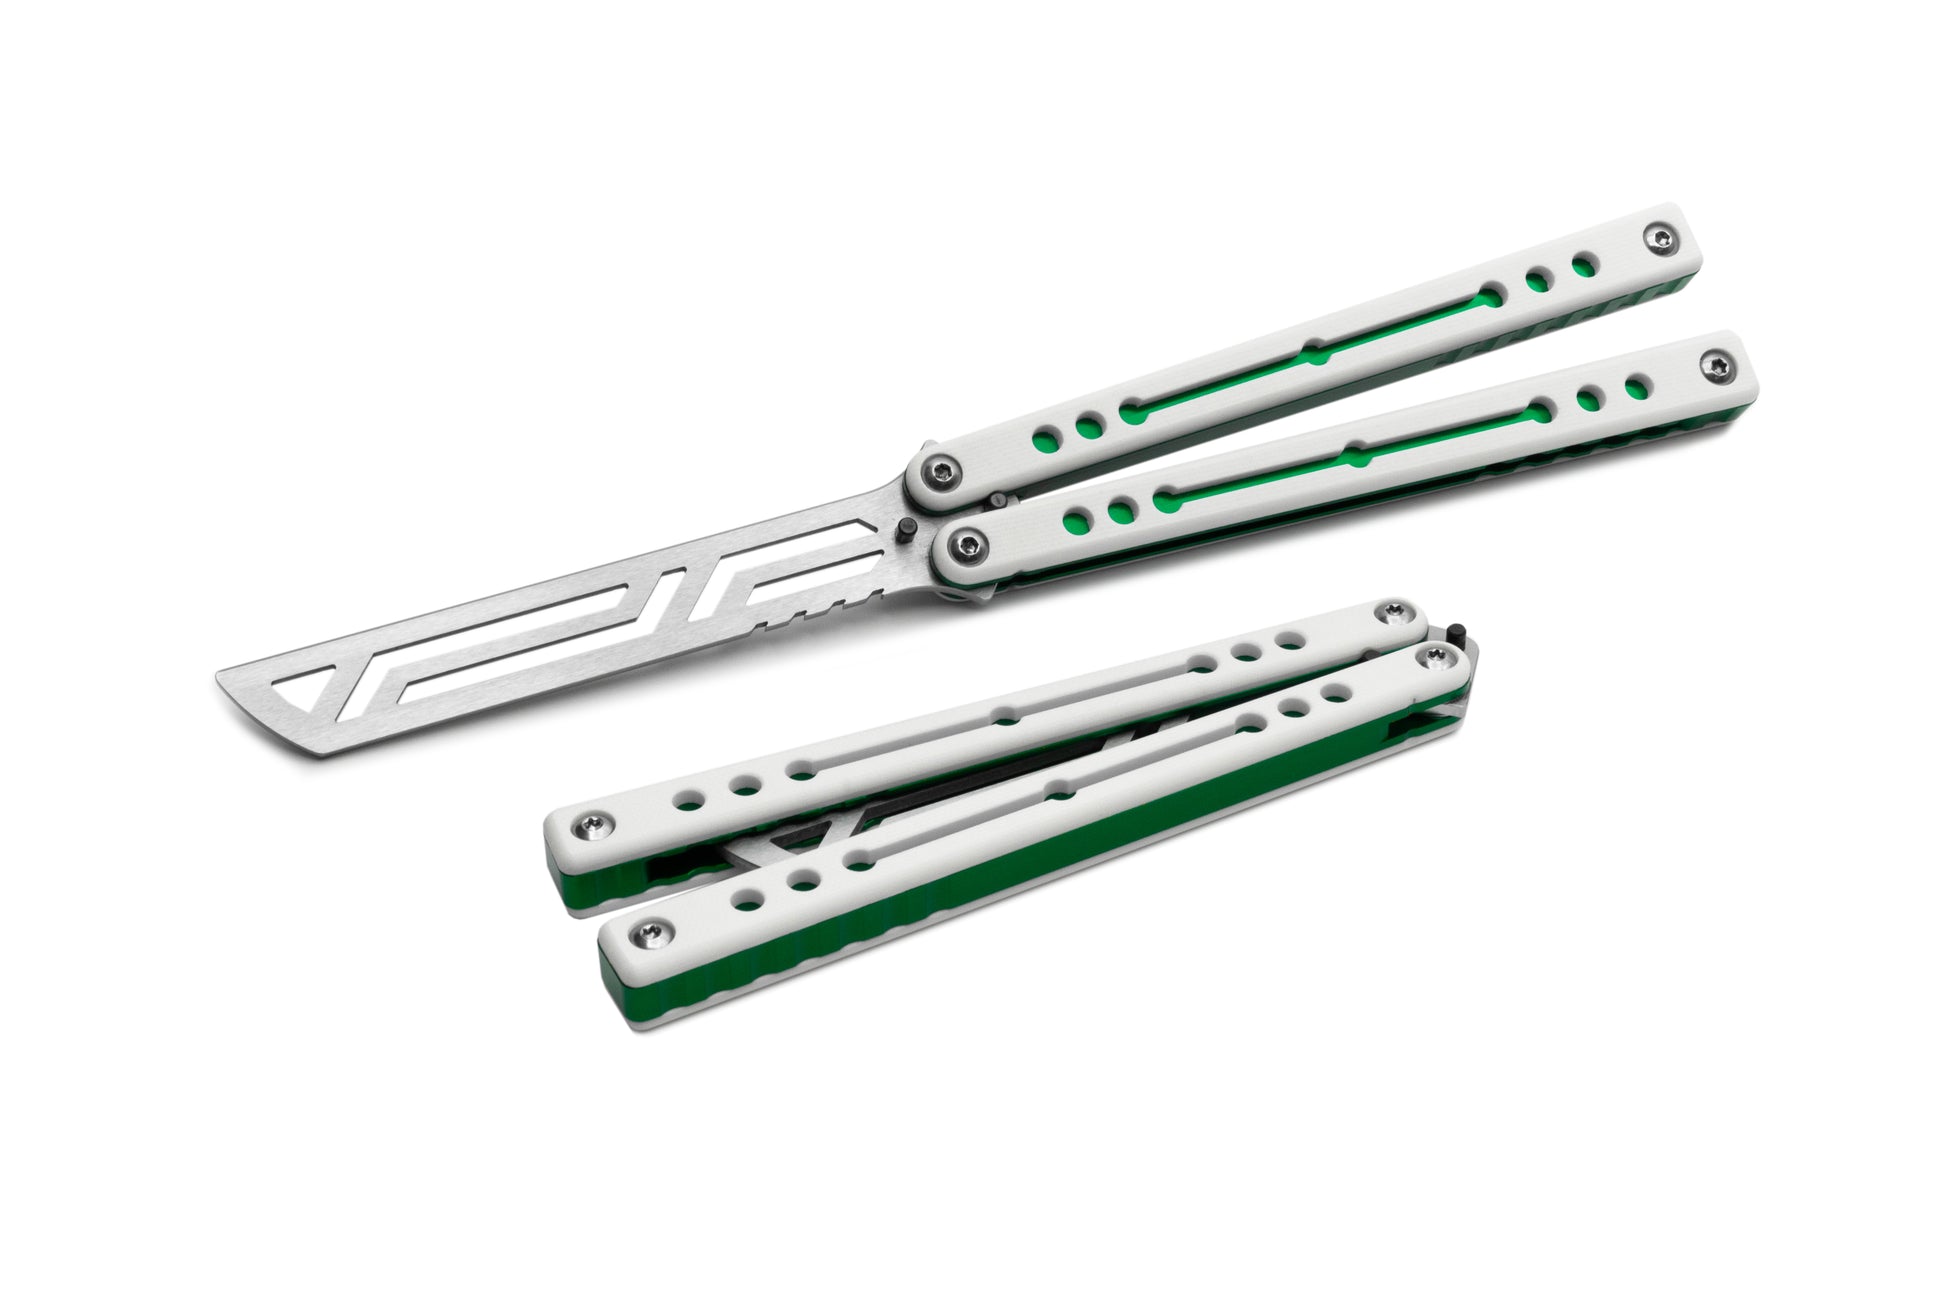 Winter Green NautilusV2 balisong with g10 scales